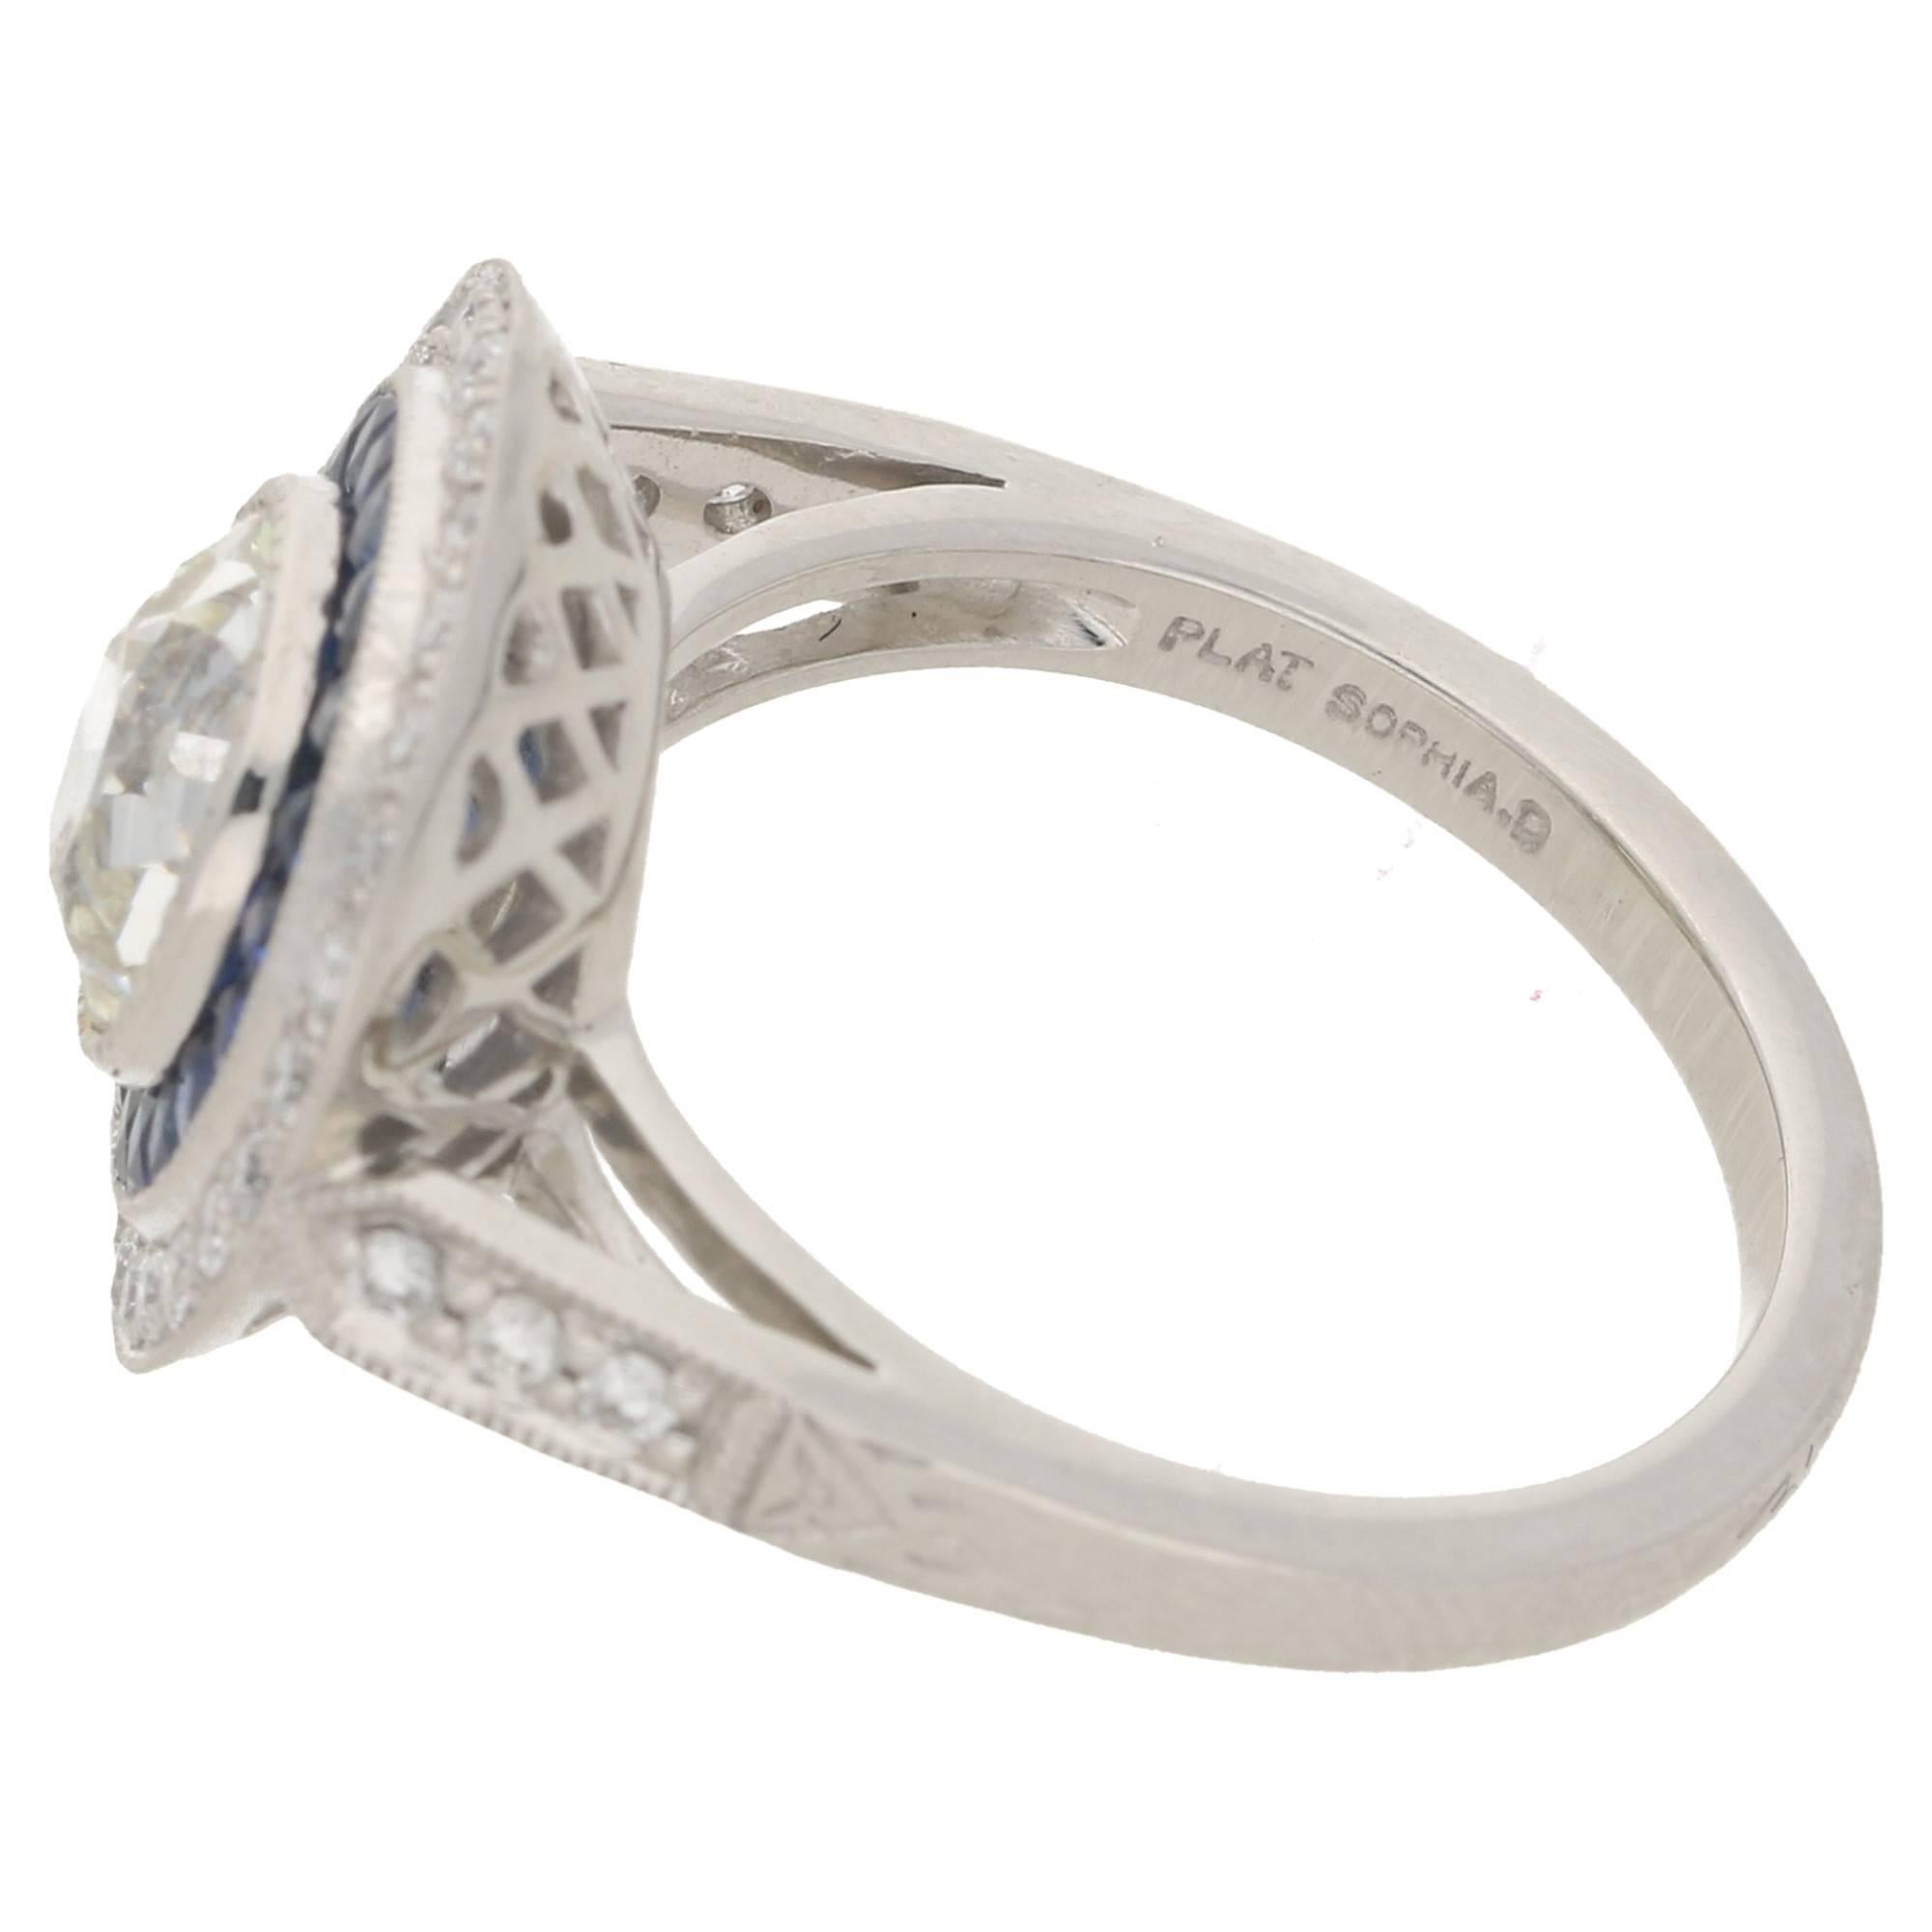 A platinum Art Deco design ring featuring an Old European cut diamond set in a rub over millegrain setting and estimated as 1.15 carats, I/J colour and Si clarity, surrounded by a halo of French cut sapphires with an estimated weight of 0.67 carats